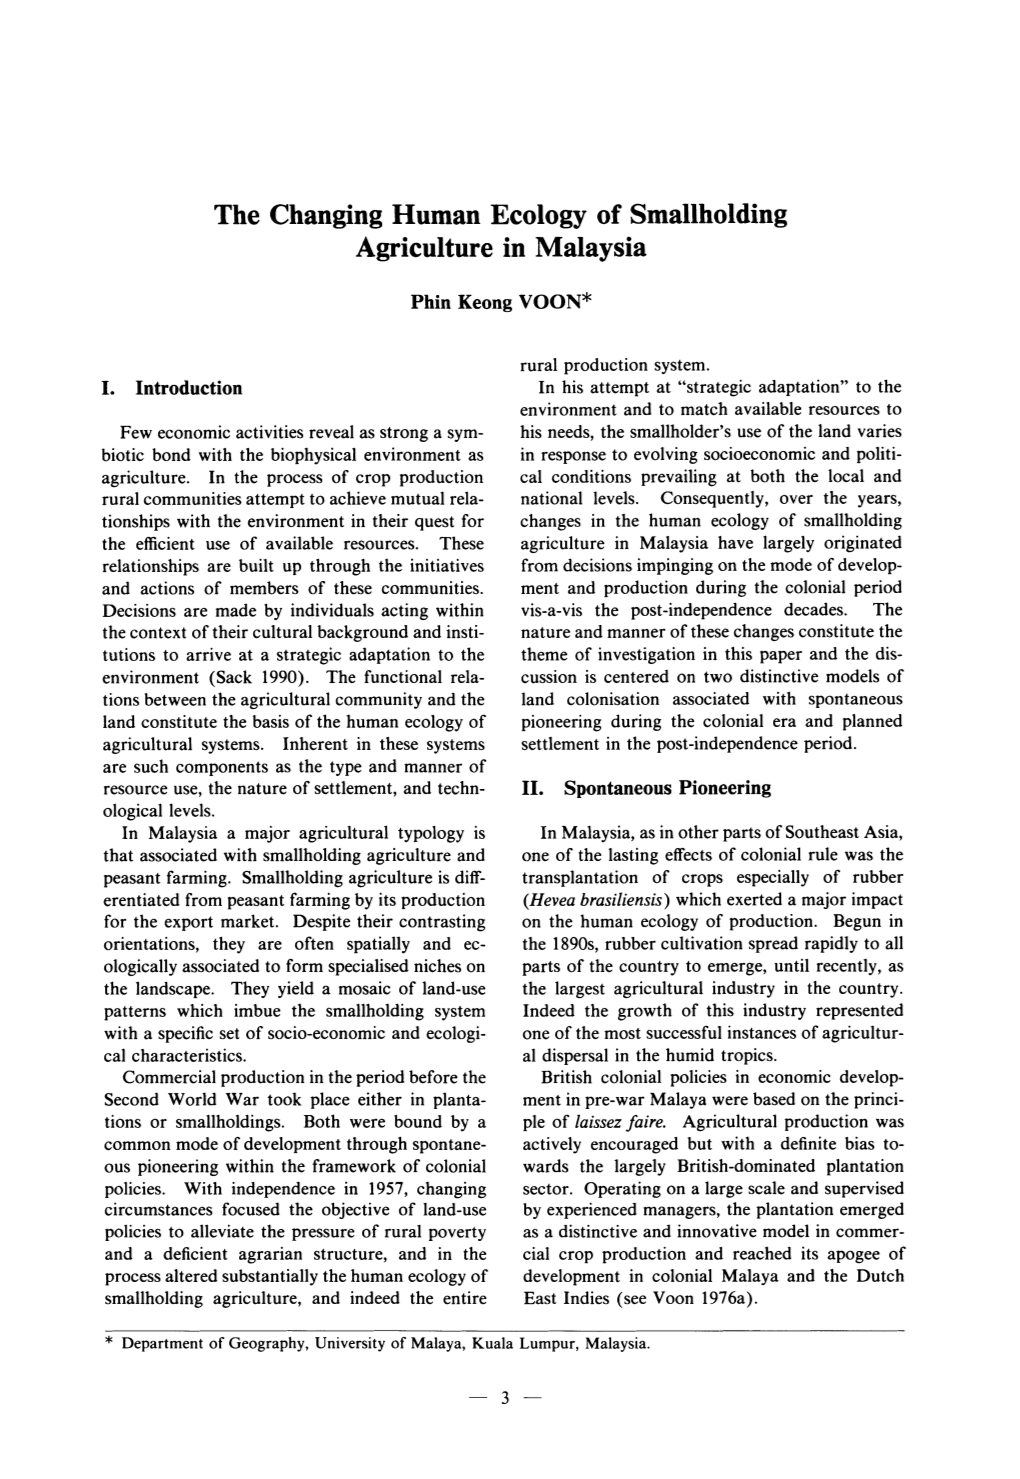 Agriculture in Malaysia